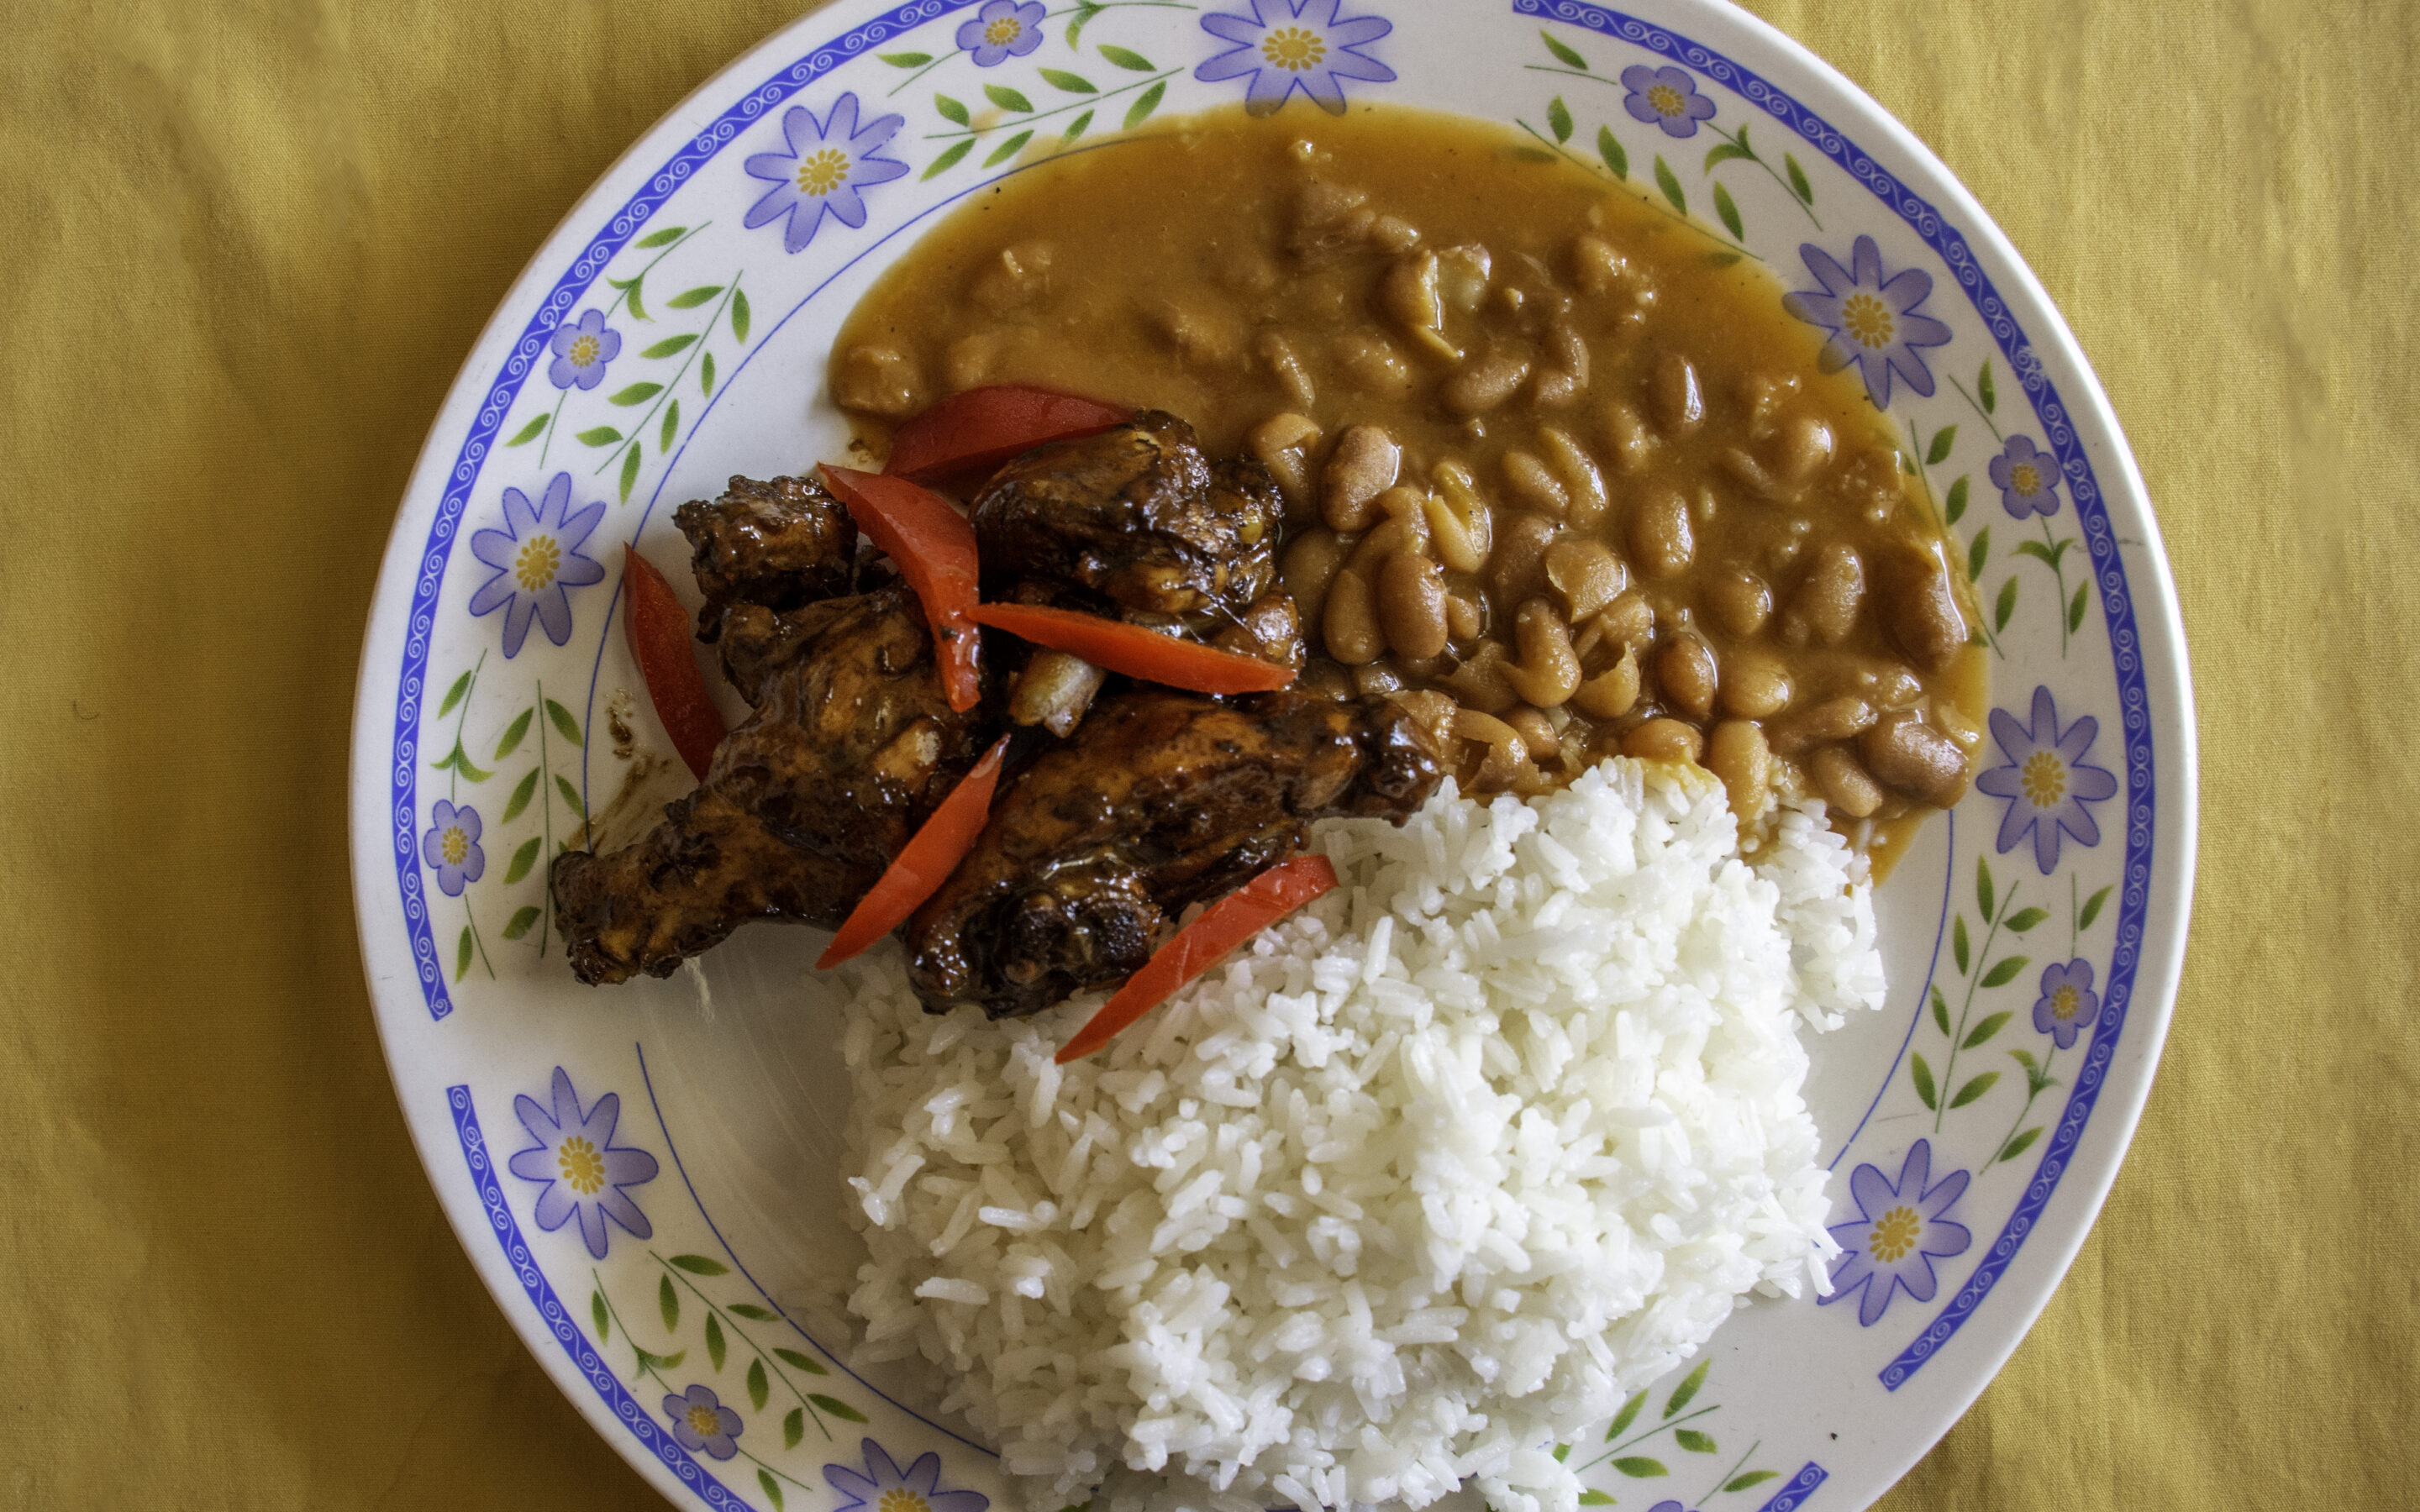 Local Dish in the Dominican Republic That Makes Dominicans Nostalgic